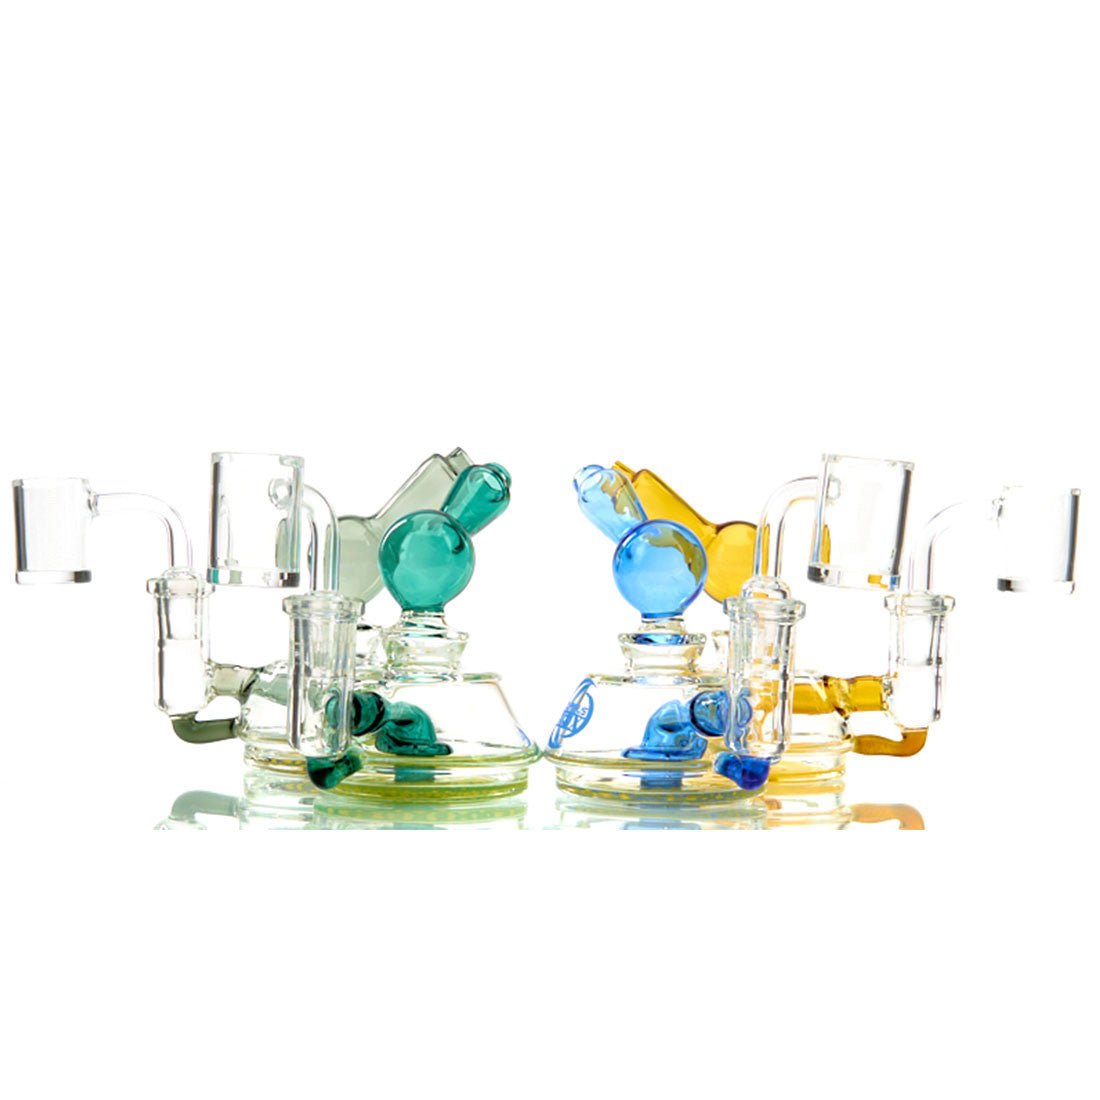 Olympus Plato Dab Rig with colored borosilicate glass and perc 2